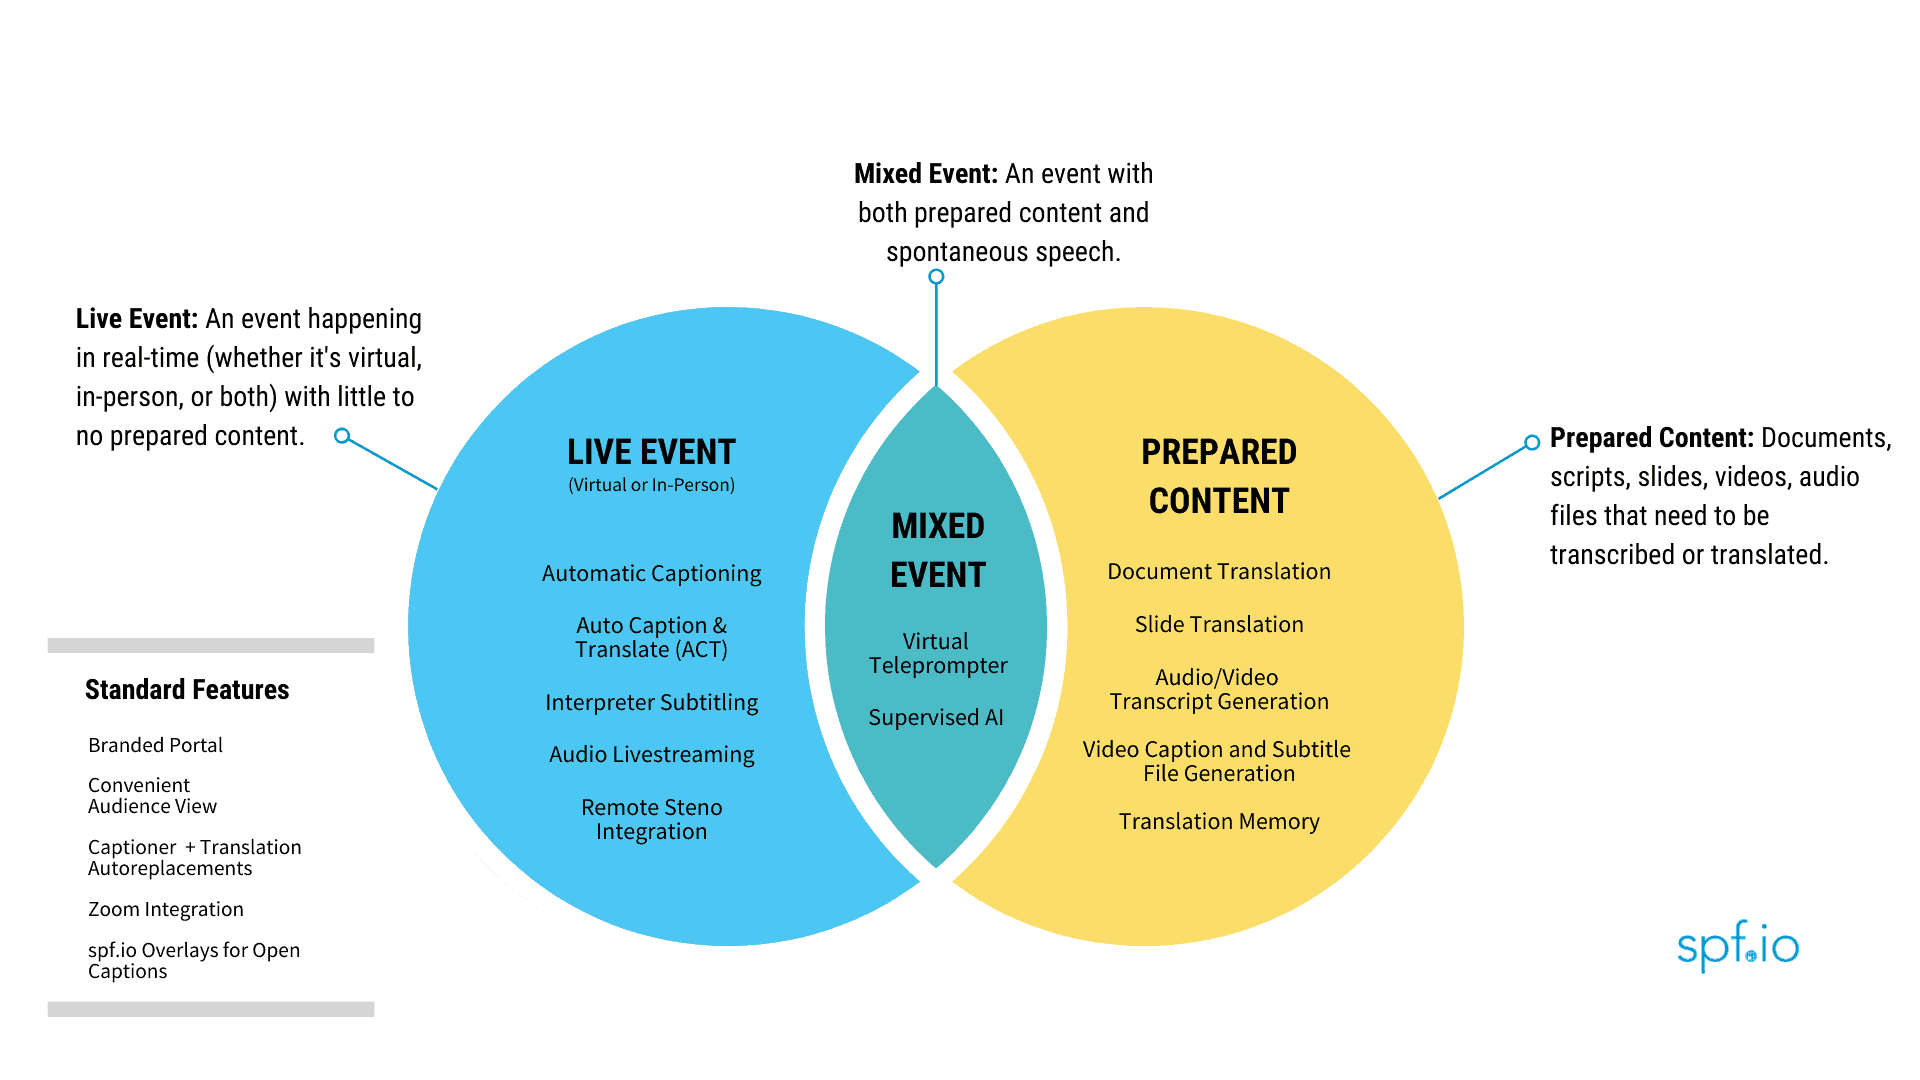 Venn diagram (from left-to-right) Live Event - Hybrid Event - Prepared Content with list of features under each heading